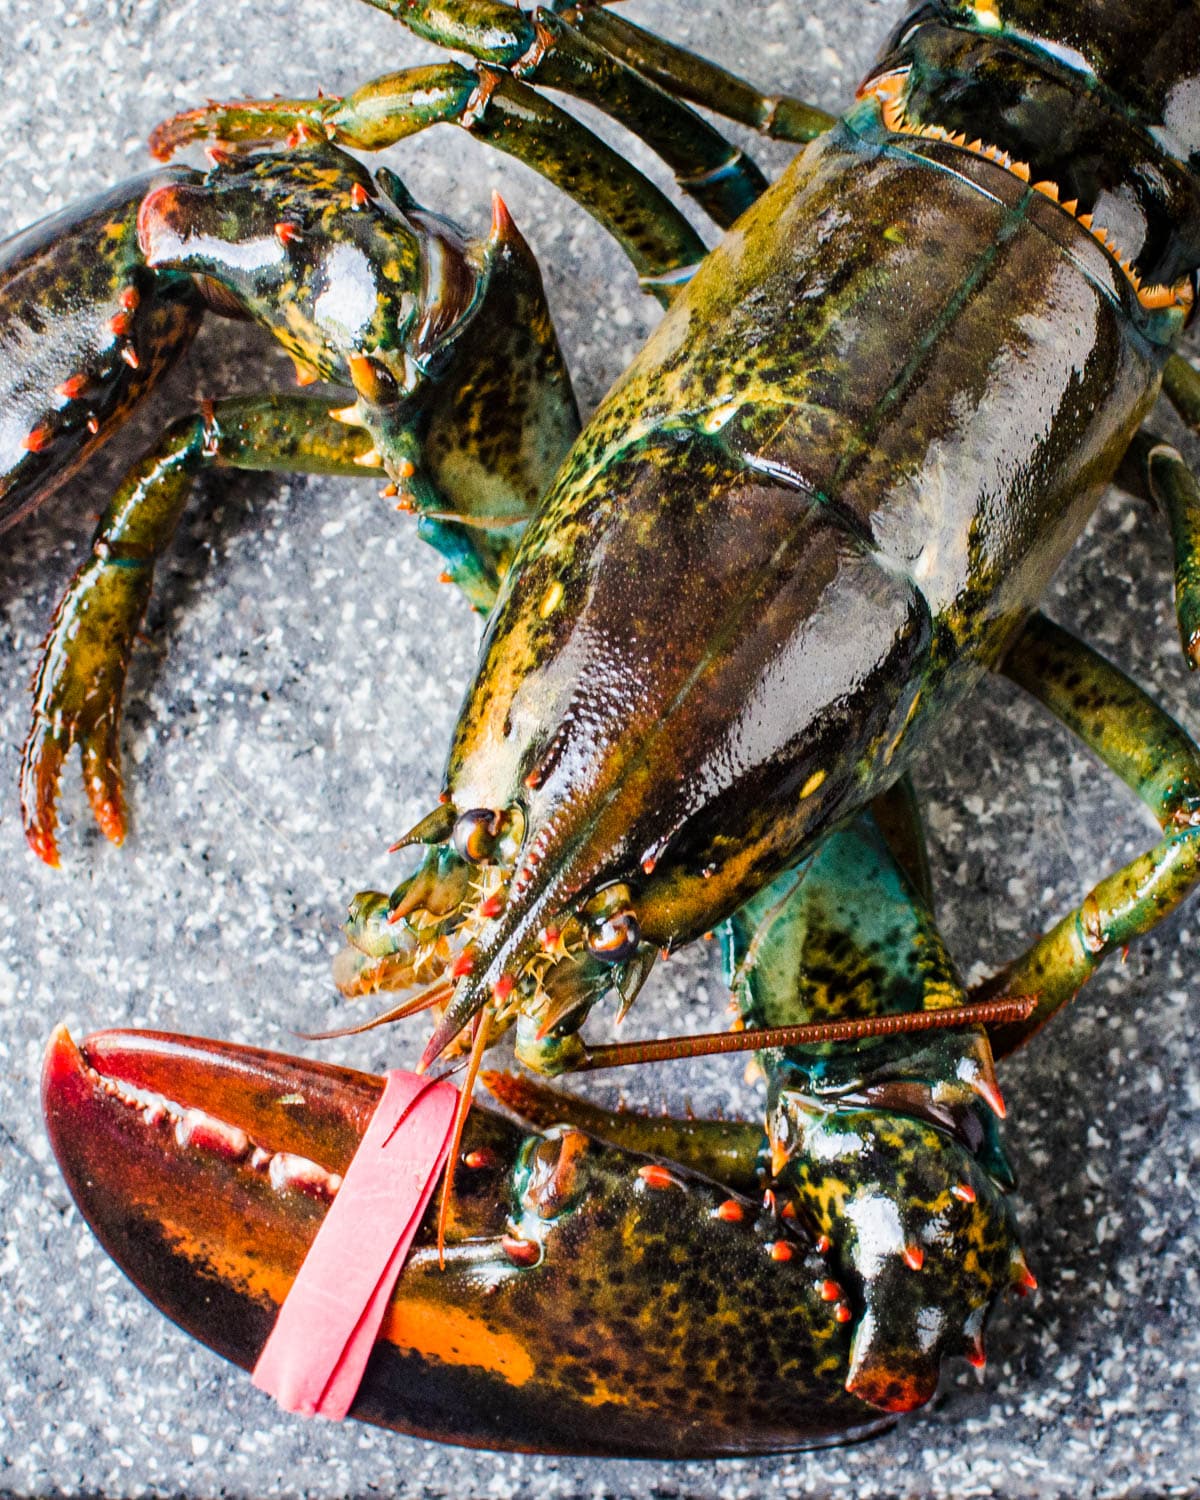 a live Maine lobster with bands around the claws.